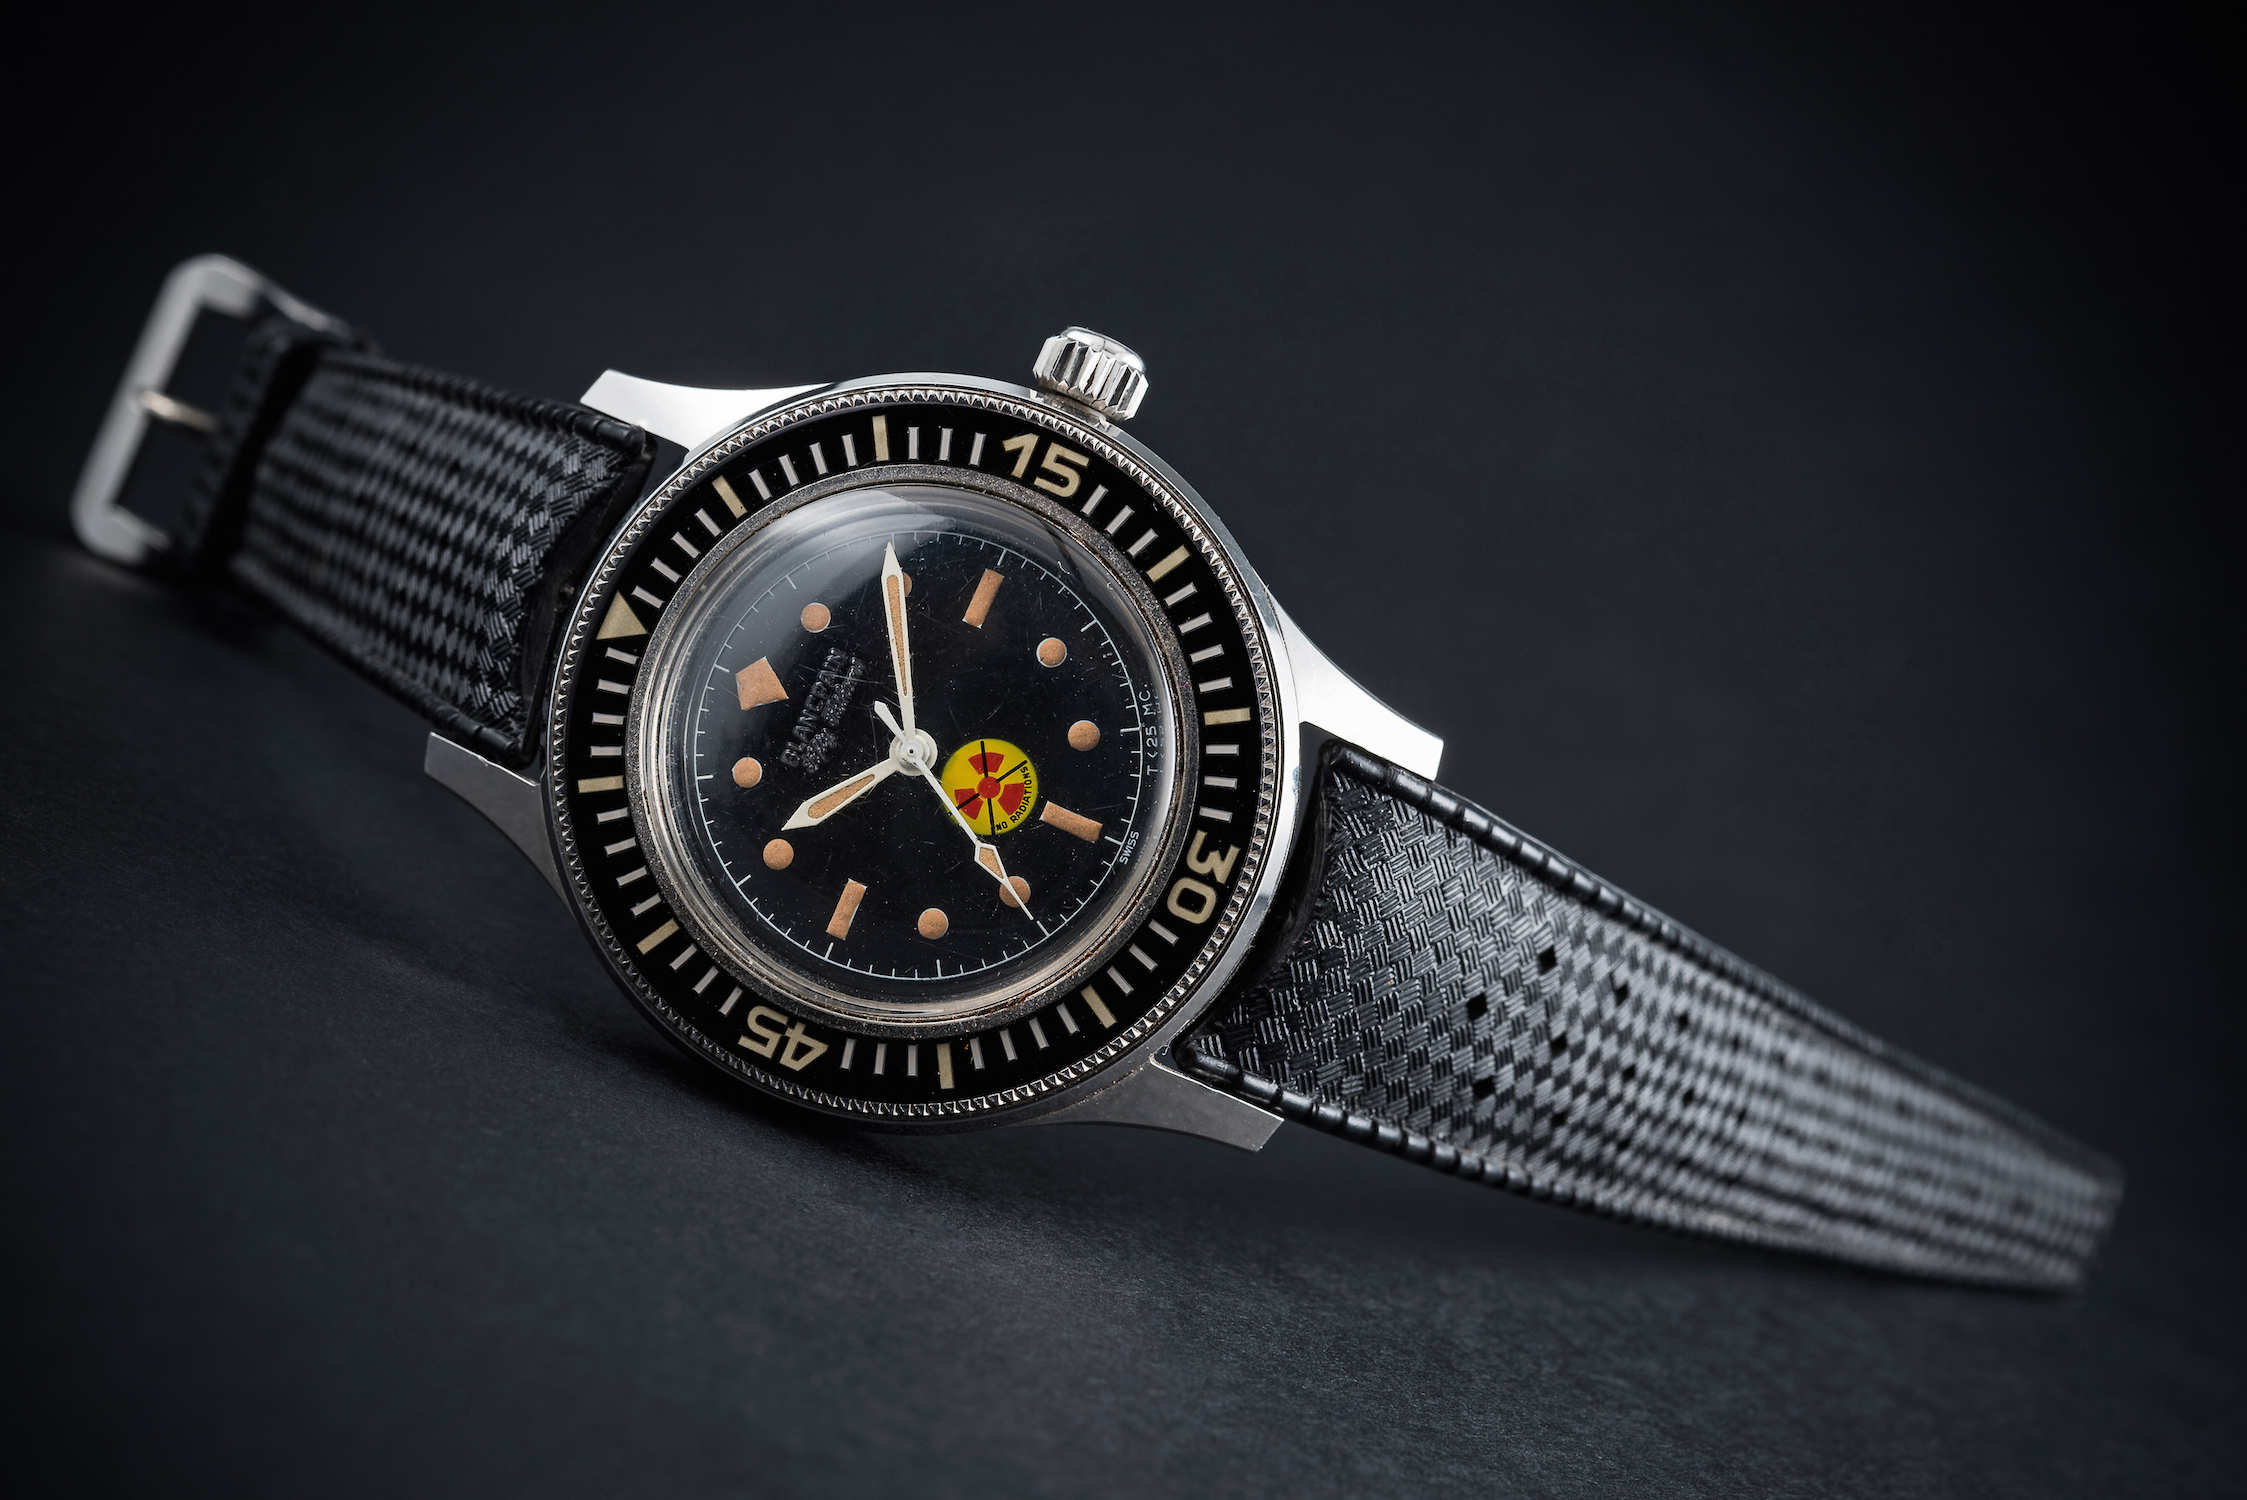 AN EXTREMELY RARE GENTLEMAN'S STAINLESS STEEL BLANCPAIN FIFTY FATHOMS DIVERS WRIST WATCH CIRCA 1960s - Image 2 of 9